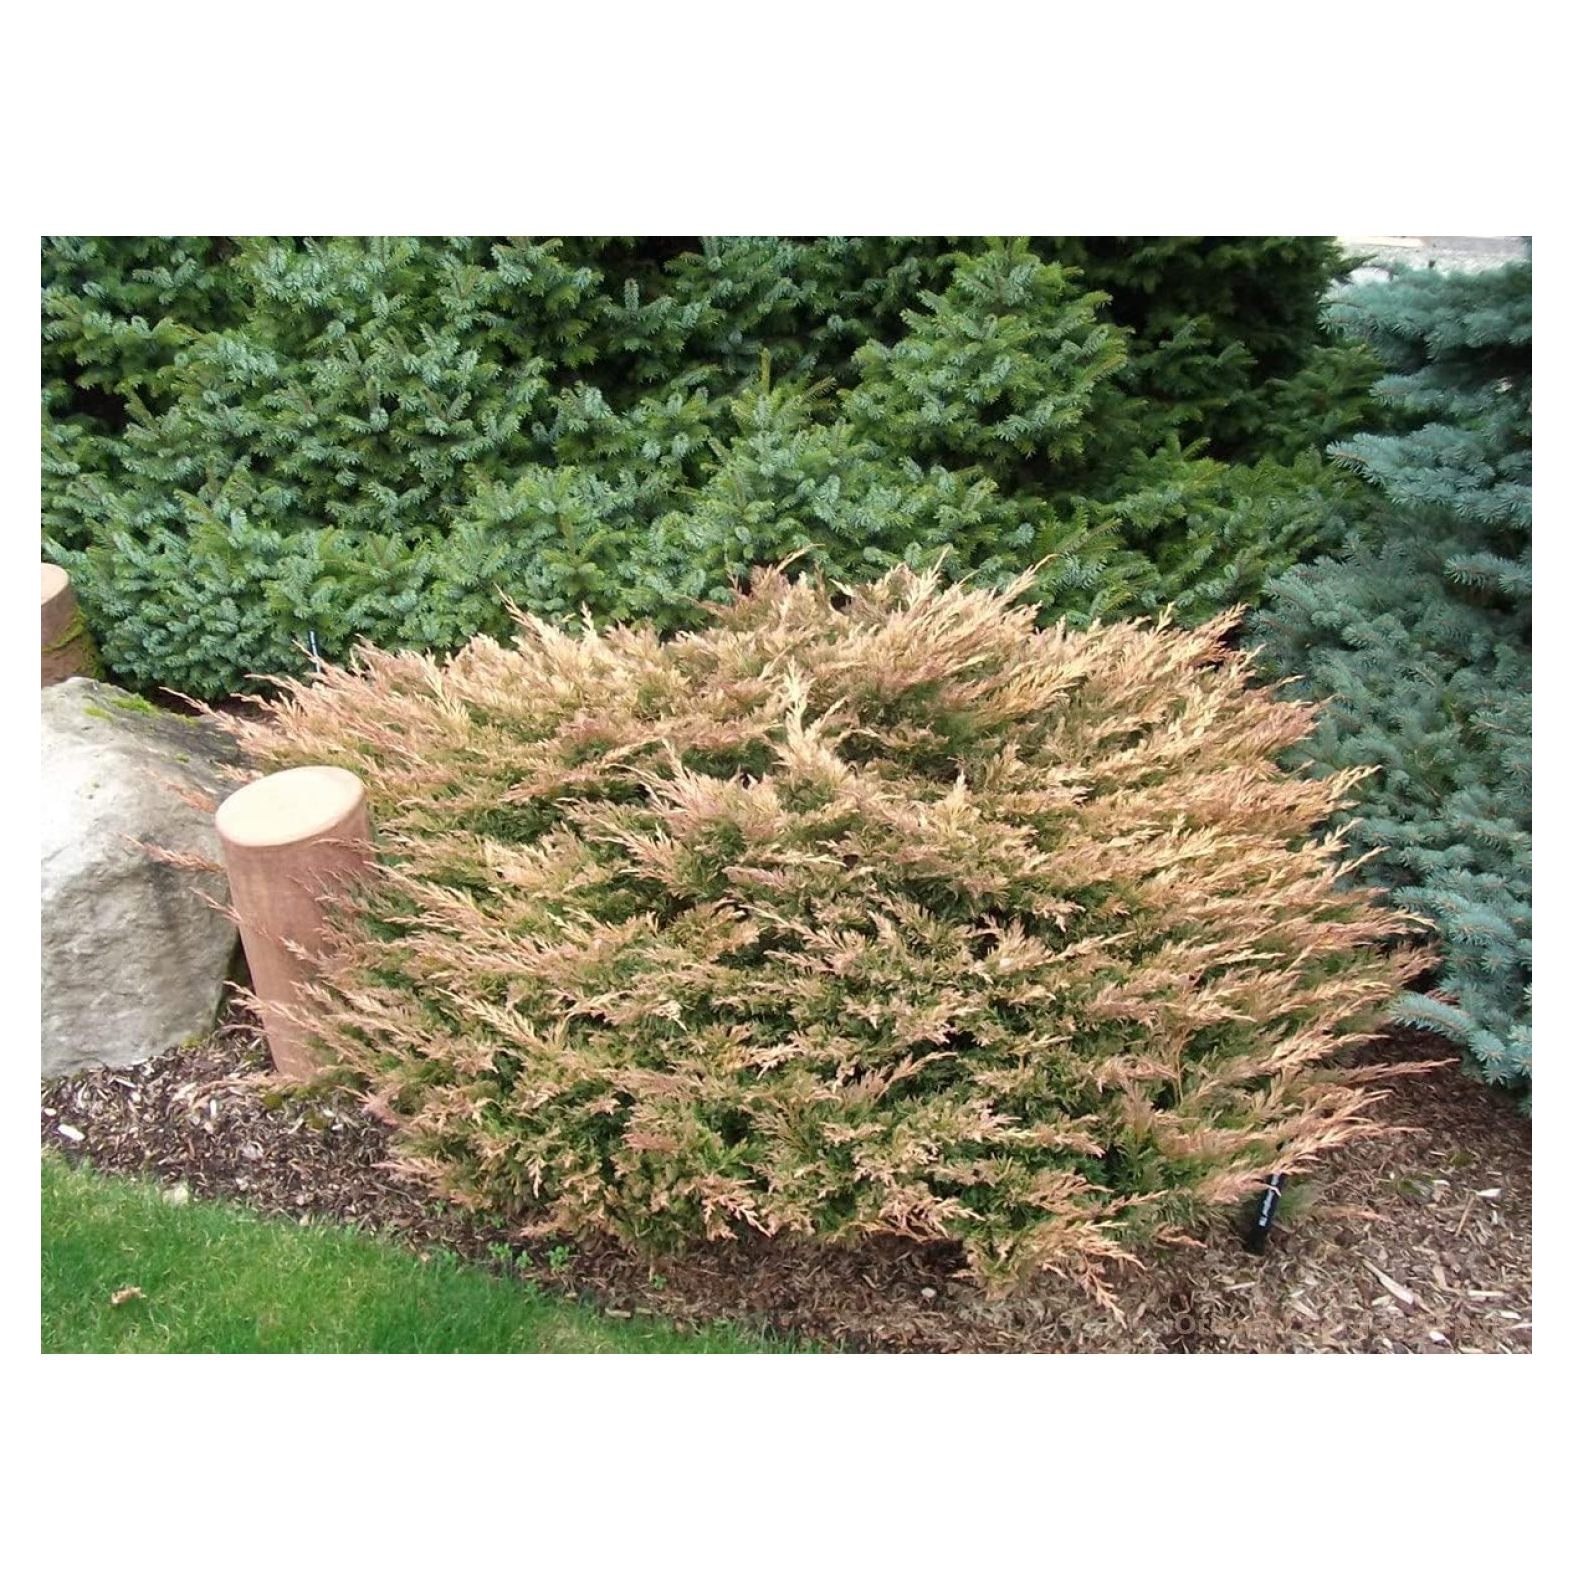 Lime Glow Juniper | 2 Live Gallon Size Plants | Juniperus Horizontalis | Cold Hardy Drought Tolerant Groundcover - image 4 of 6